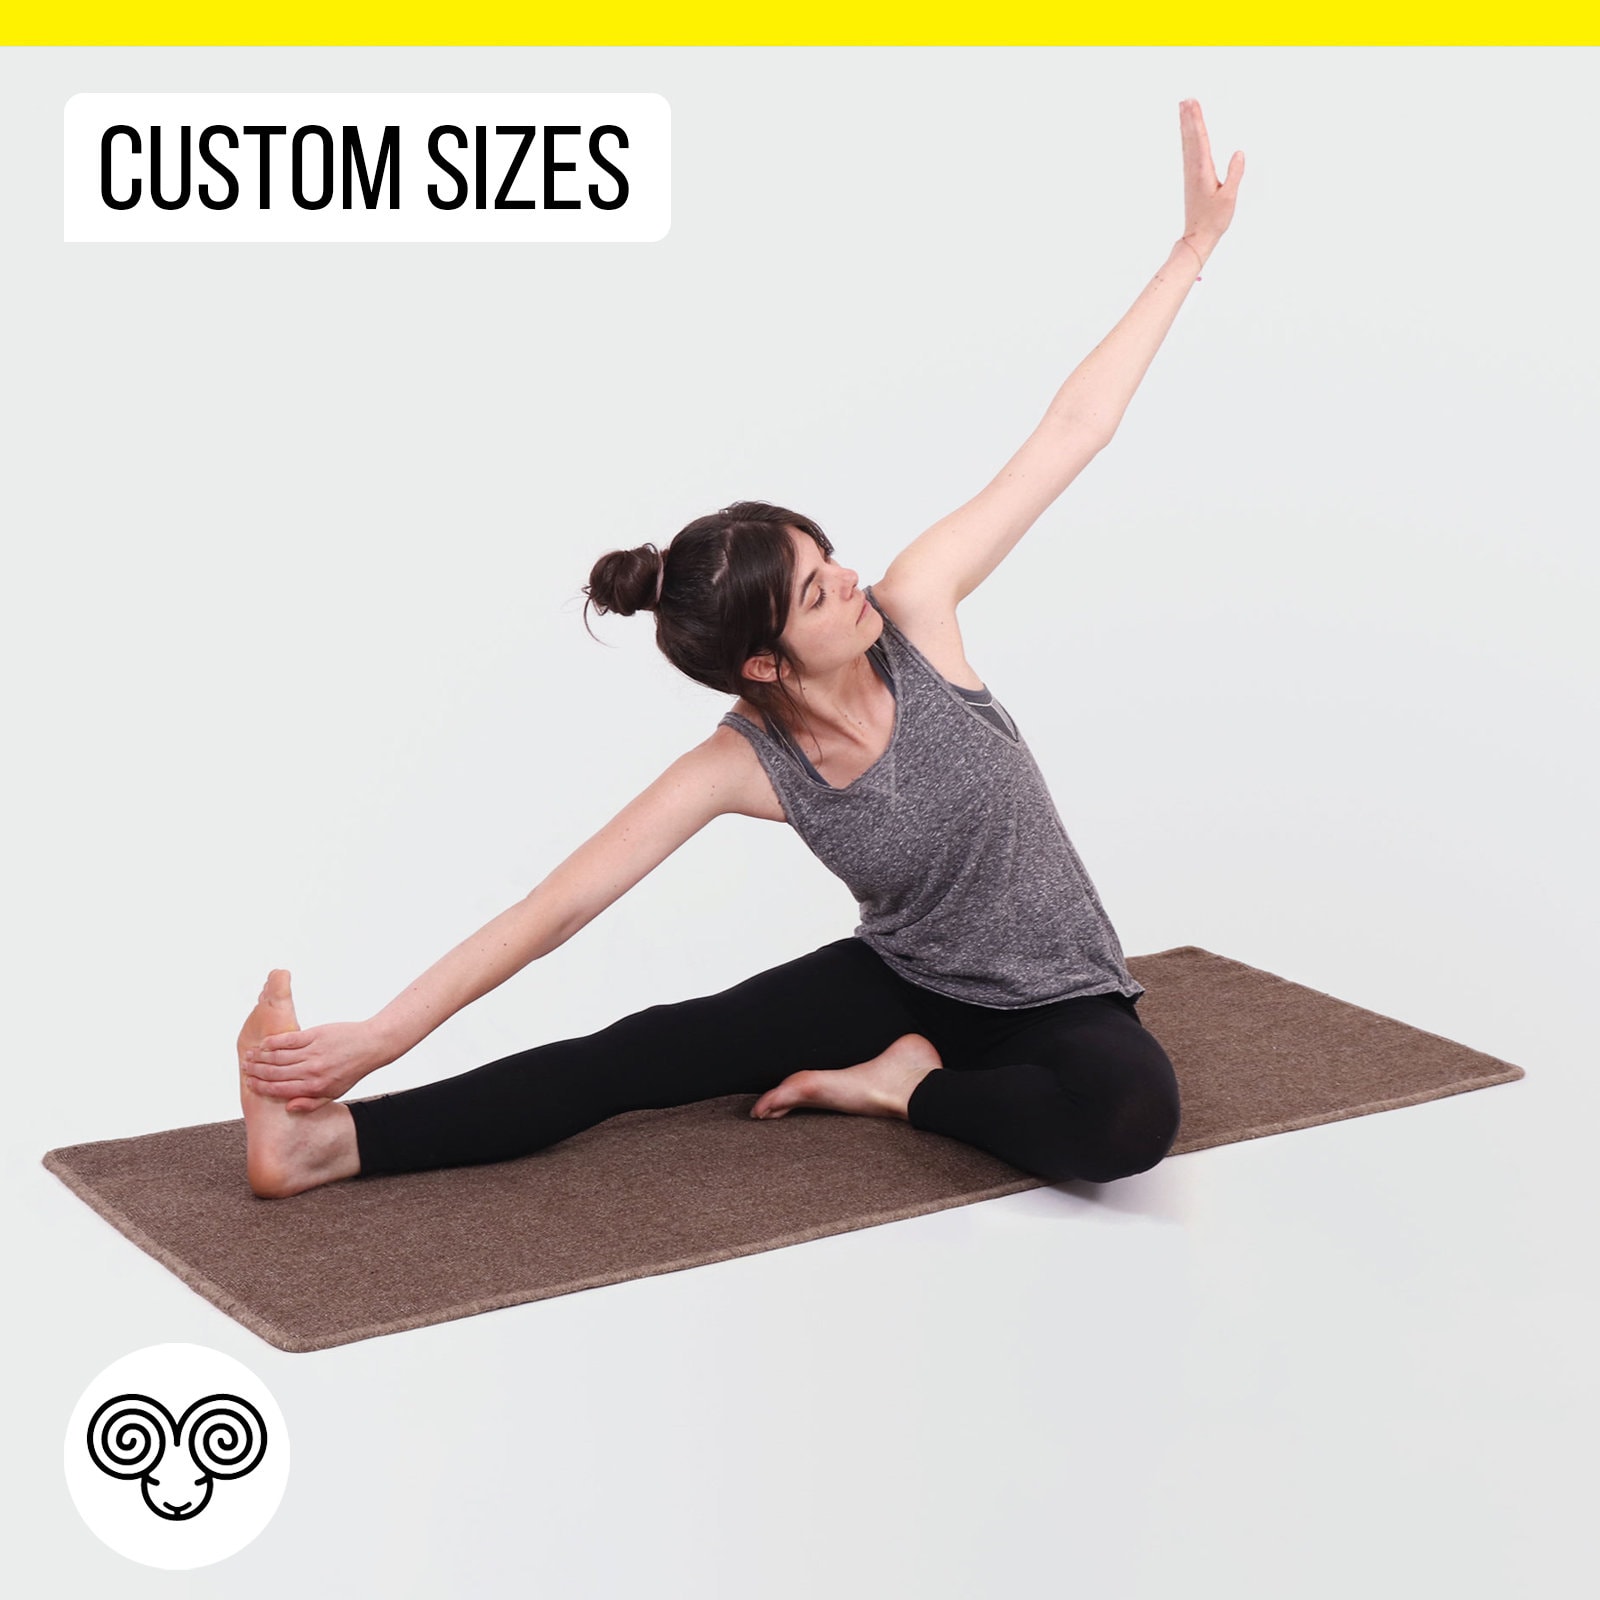 Wool yoga mat with coconut